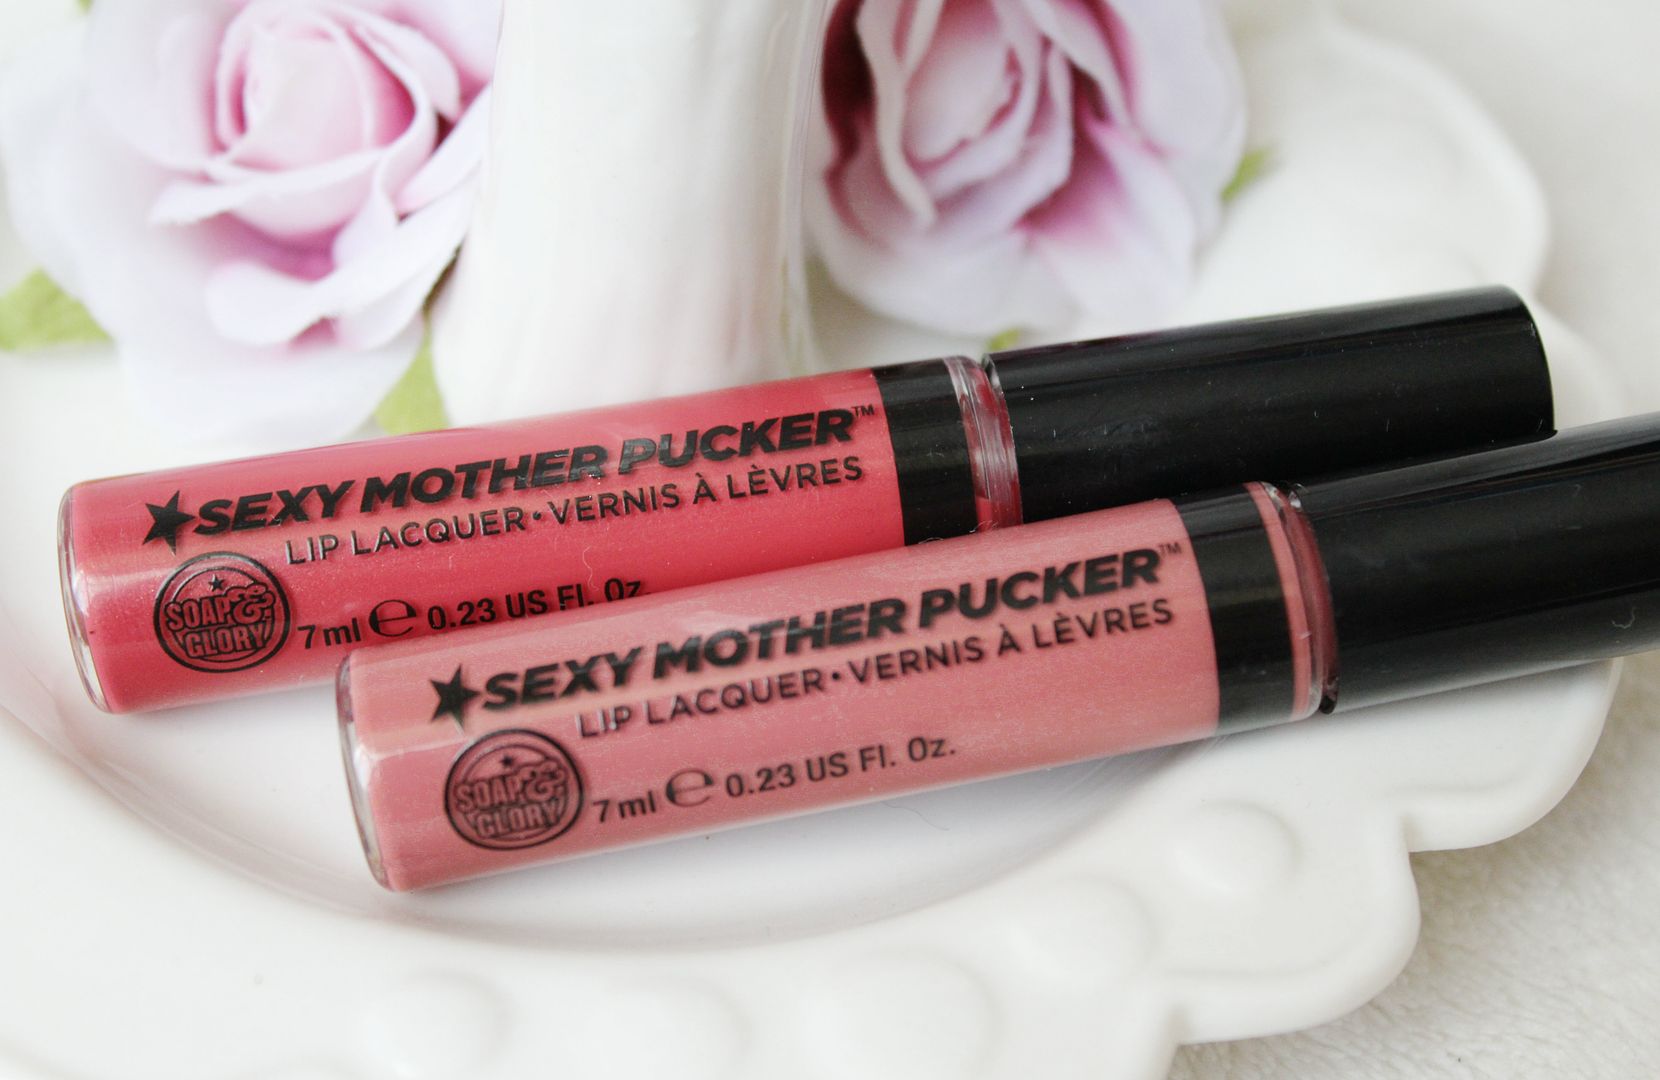 Soap And Glory Sexy Mother Pucker Lip Lacquers What Cha Ma Coral Charm Offensive Bold Spring Lips Packaging Review Belle Amie UK Beauty Fashion Lifestyle Blog